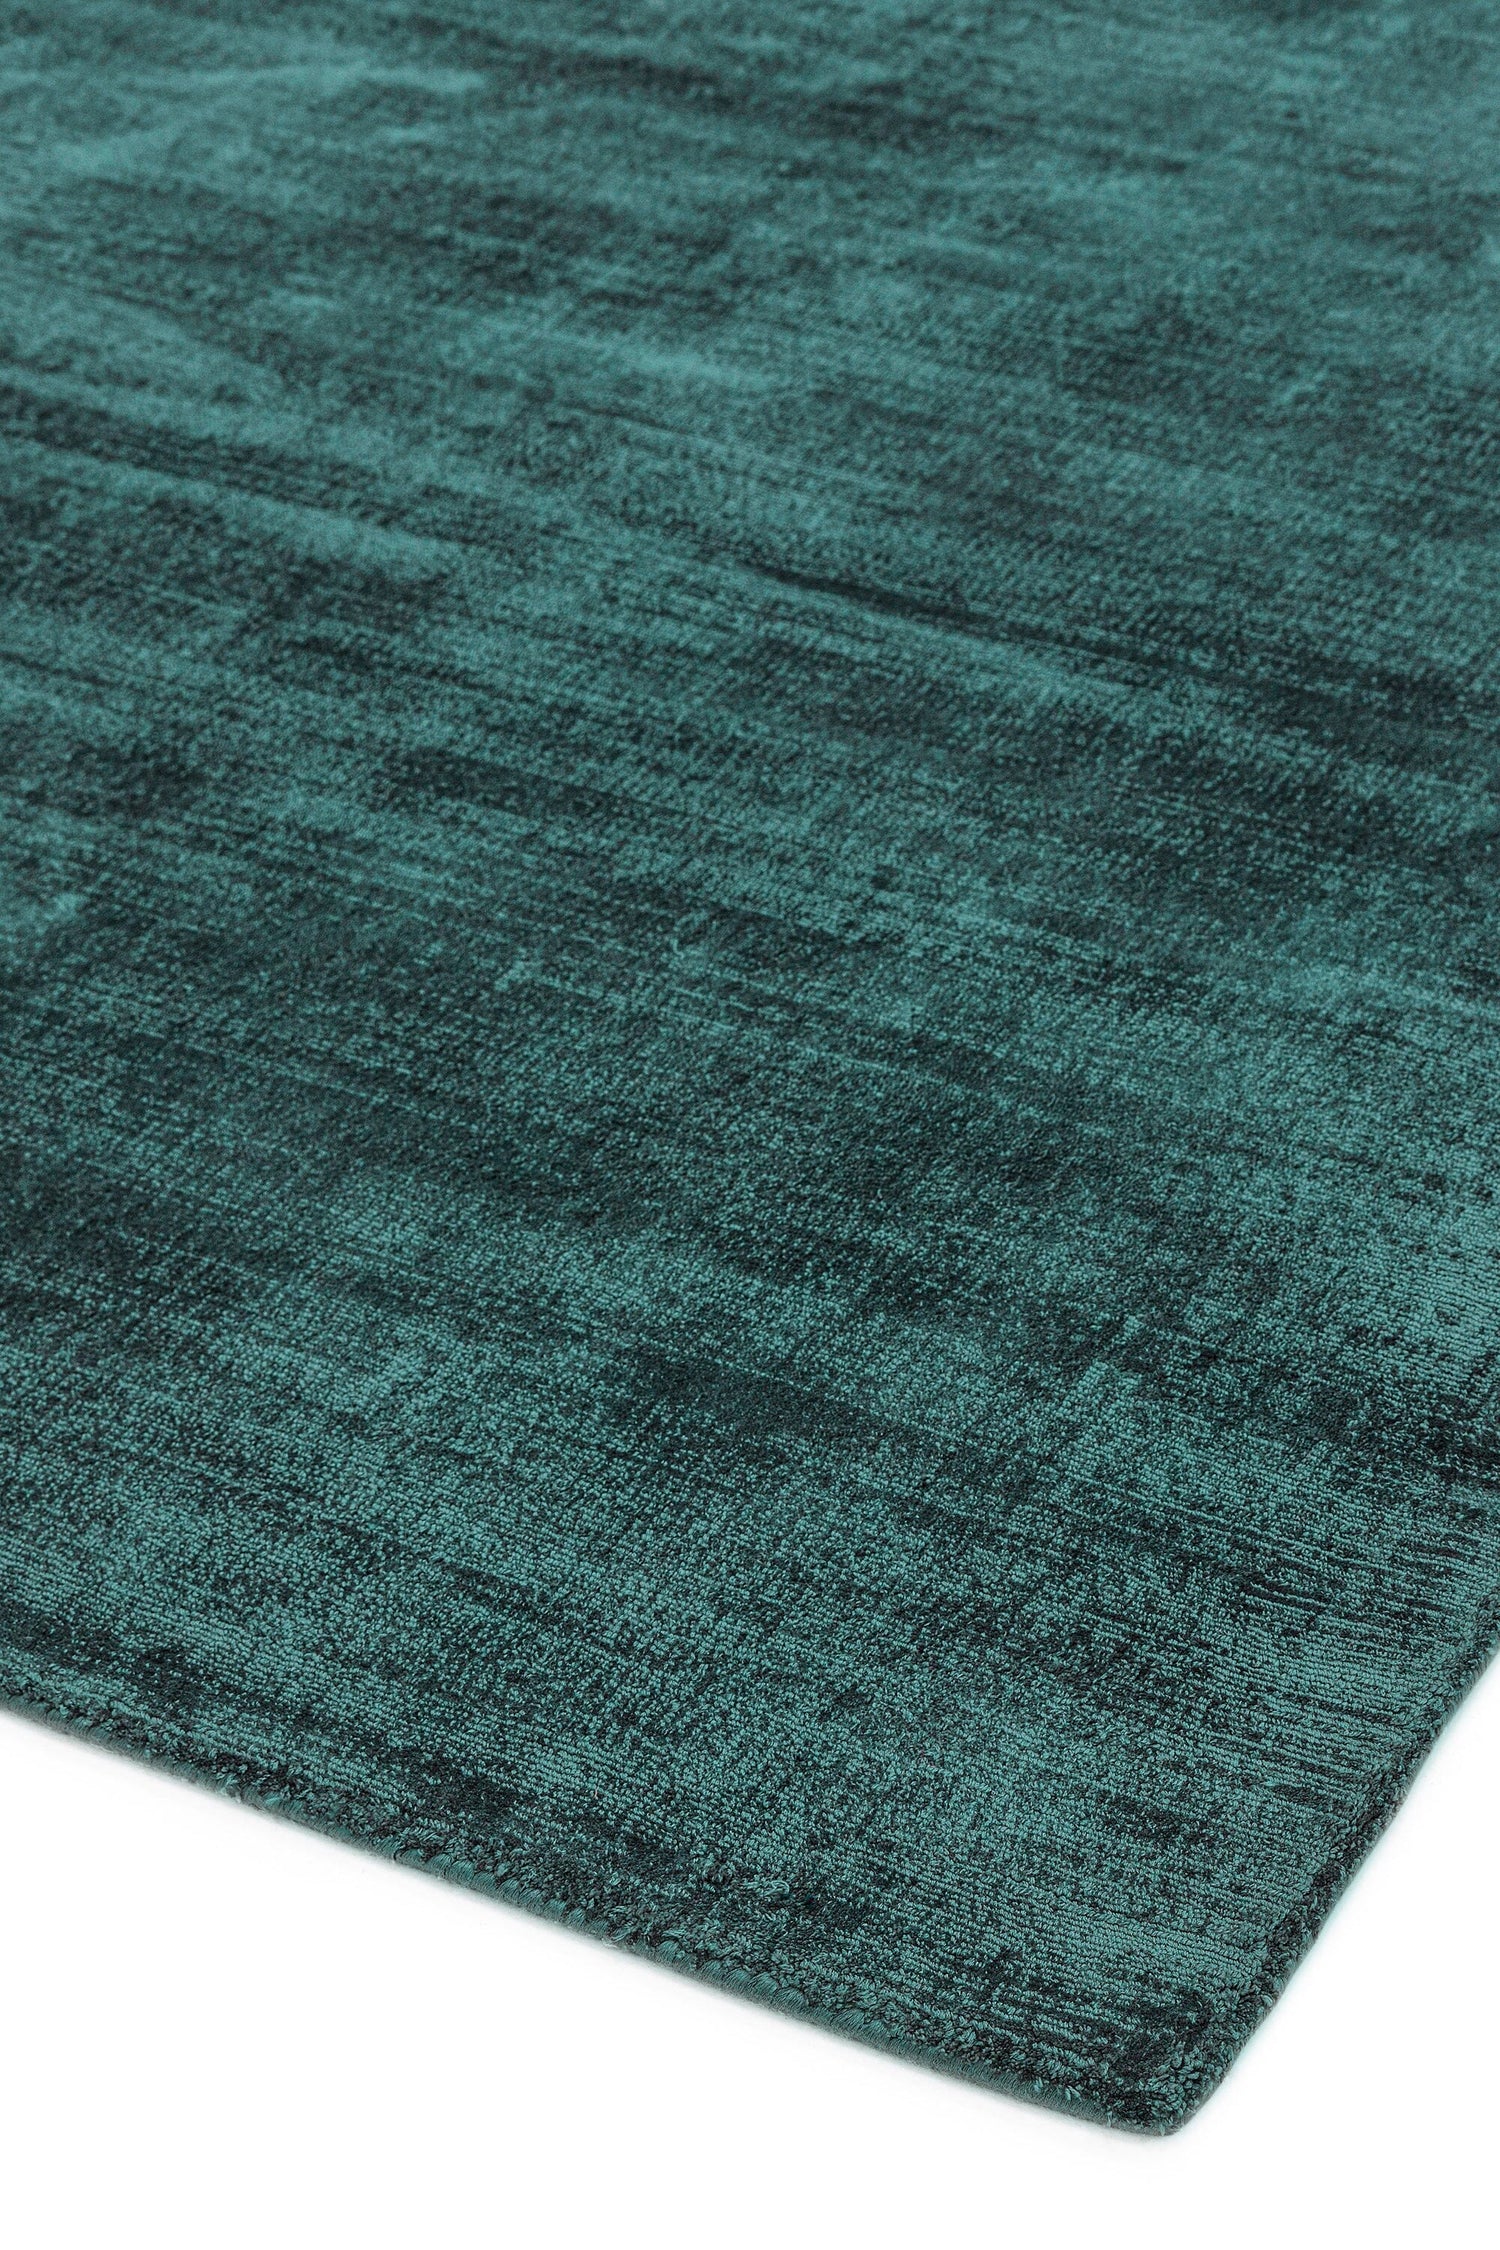  Asiatic Carpets-Asiatic Carpets Blade Hand Woven Runner Teal - 66 x 240cm-Green 293 